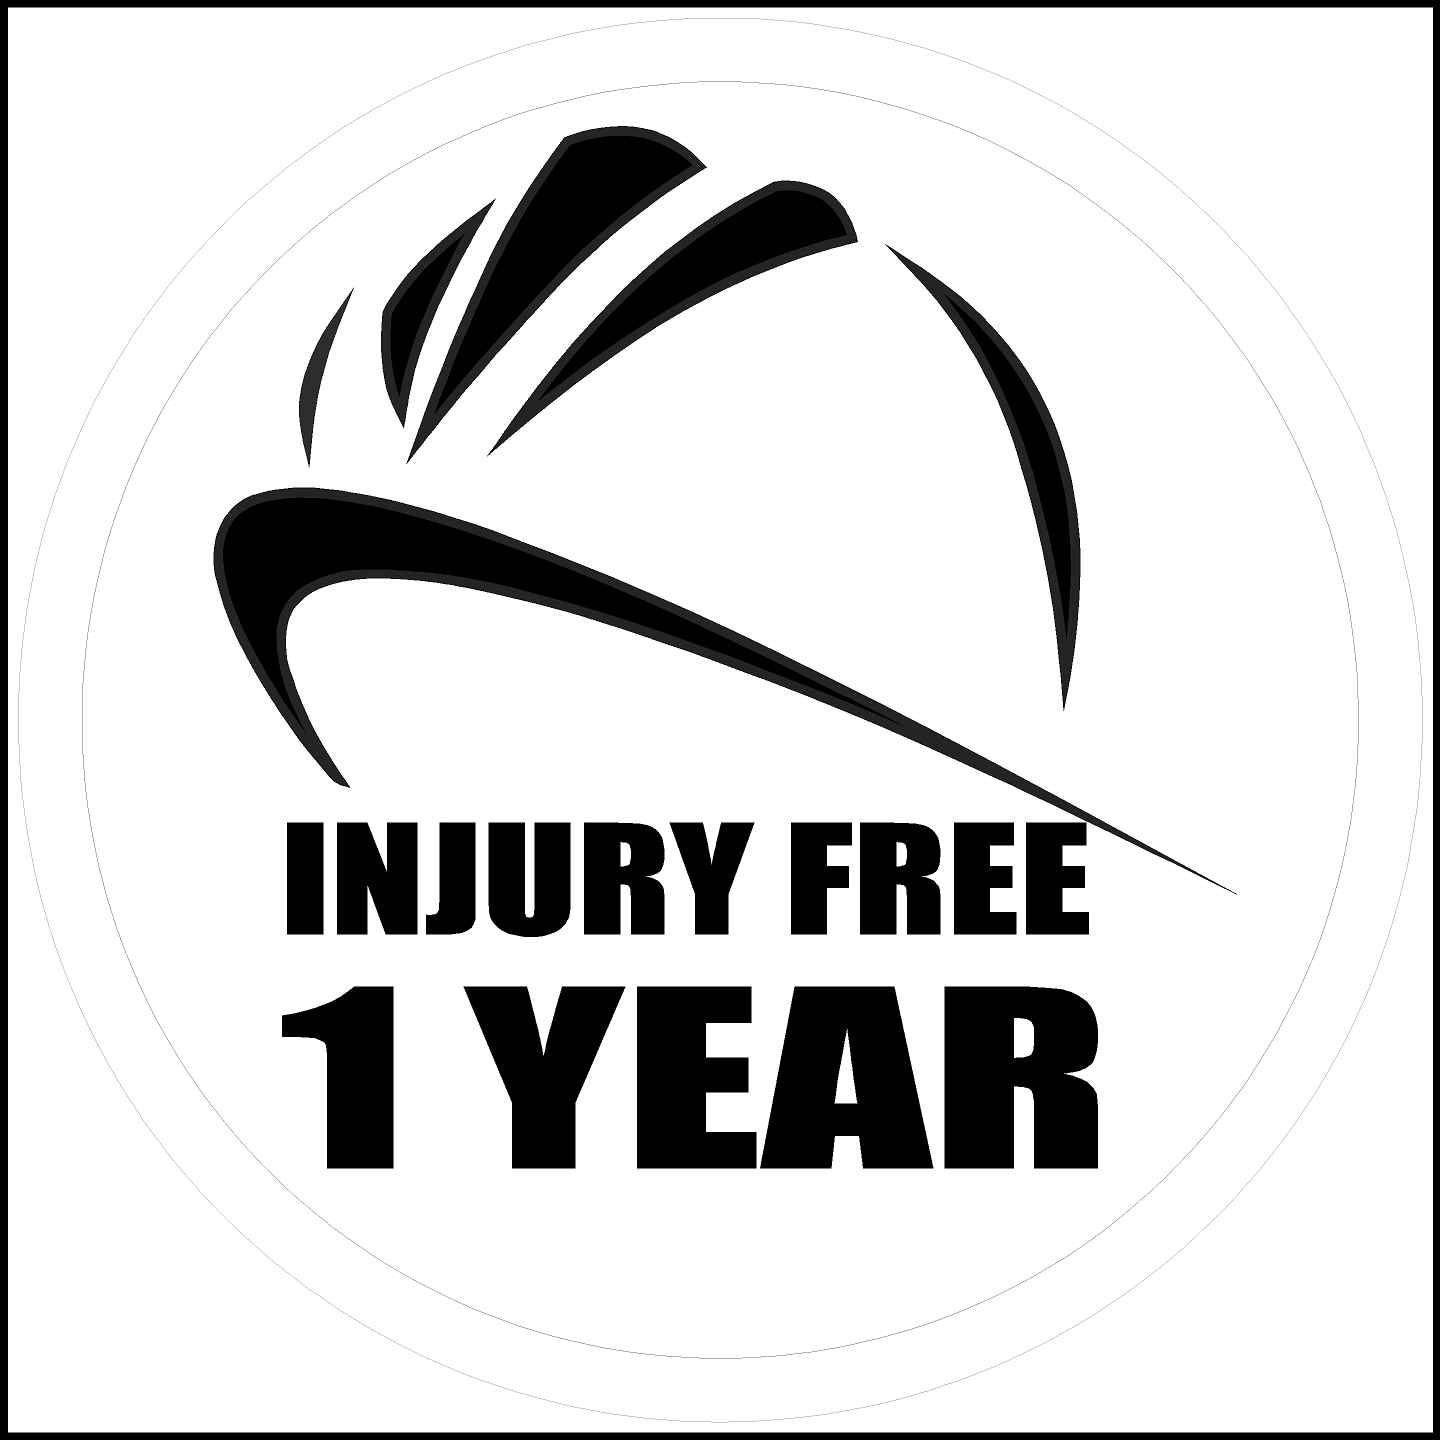 One year injury free sticker printed in black and white.